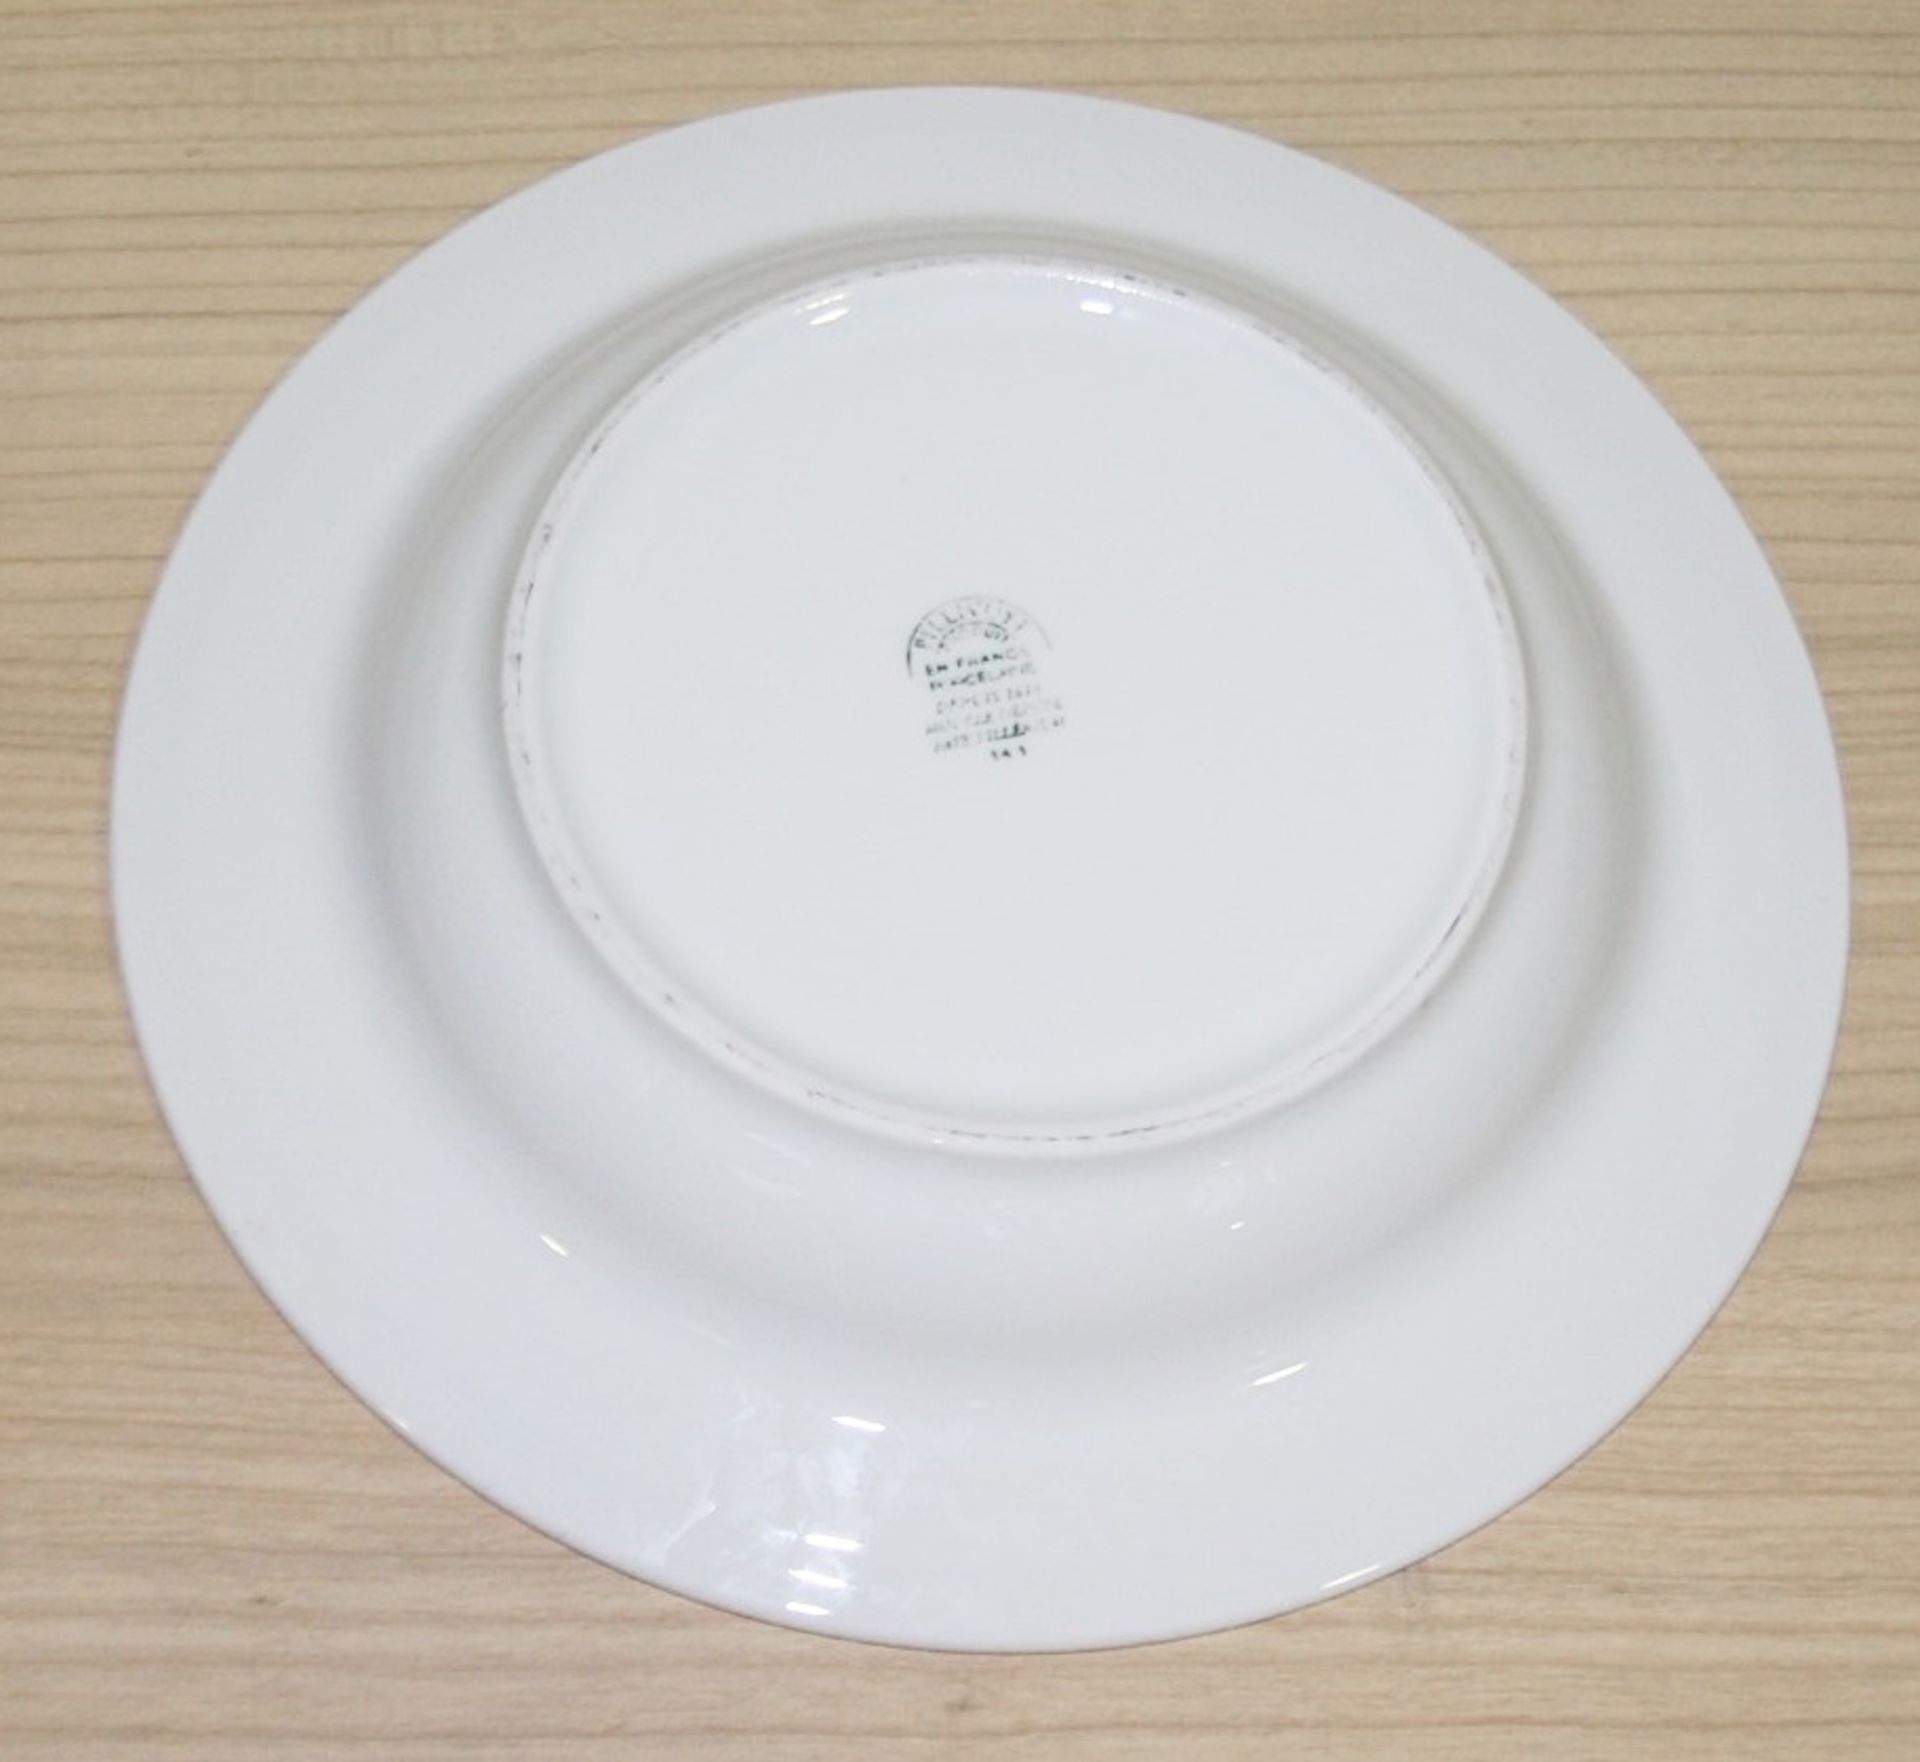 36 x PILLIVUYT Porcelain Commercial Small Pasta / Soup Bowls In White Featuring 'Famous Branding' In - Image 2 of 3